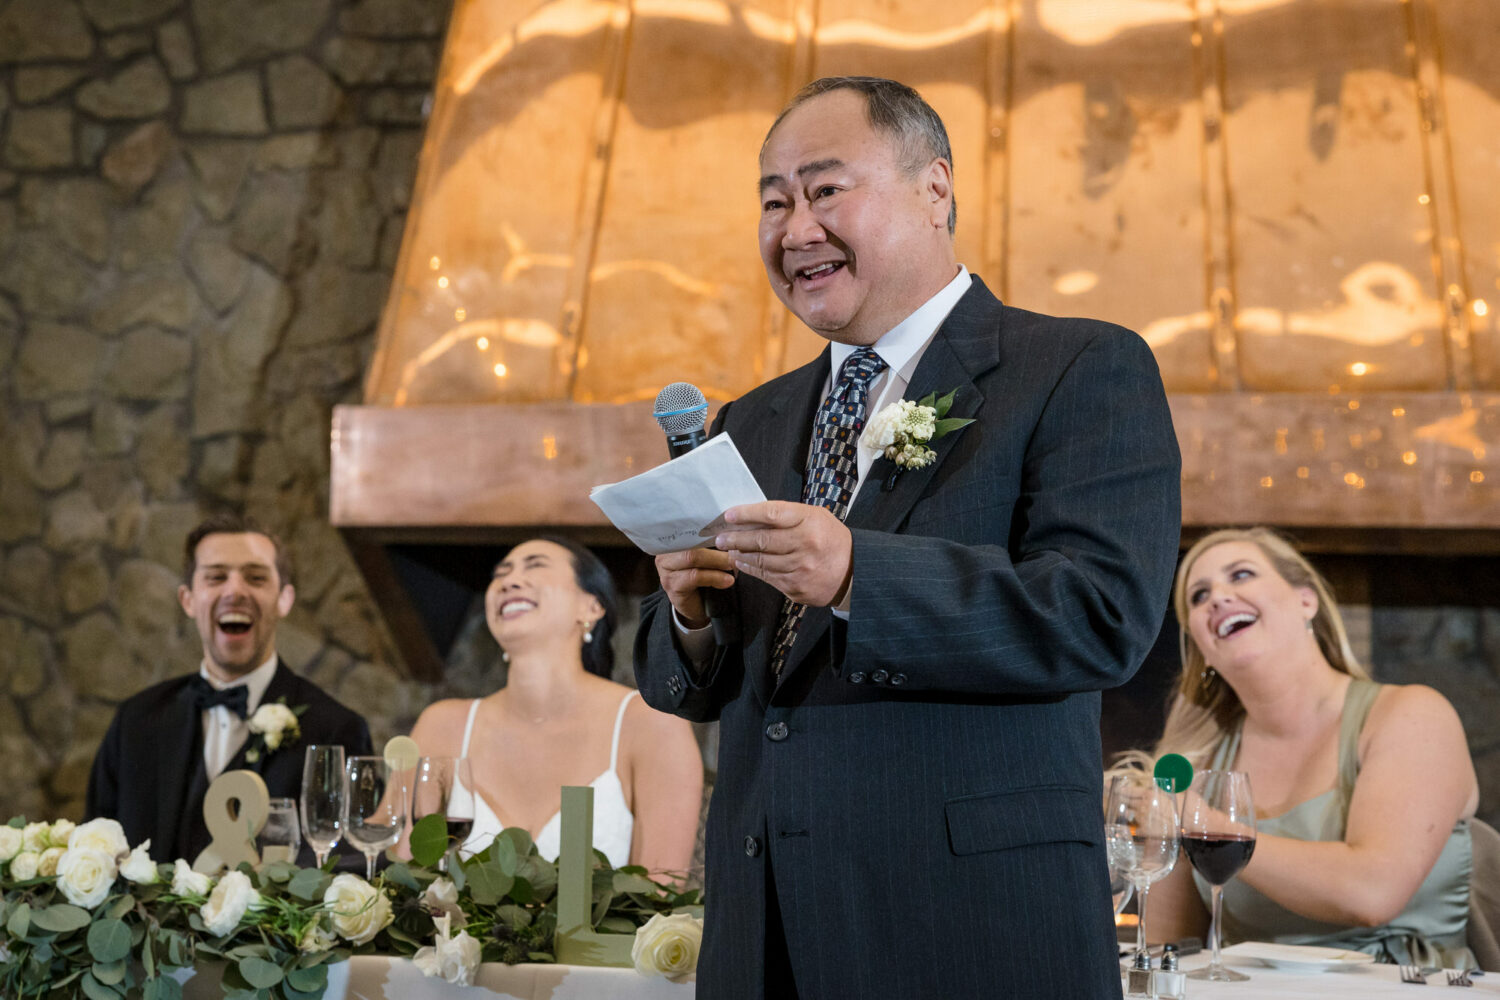 A funny reception speech by the father of the bride.